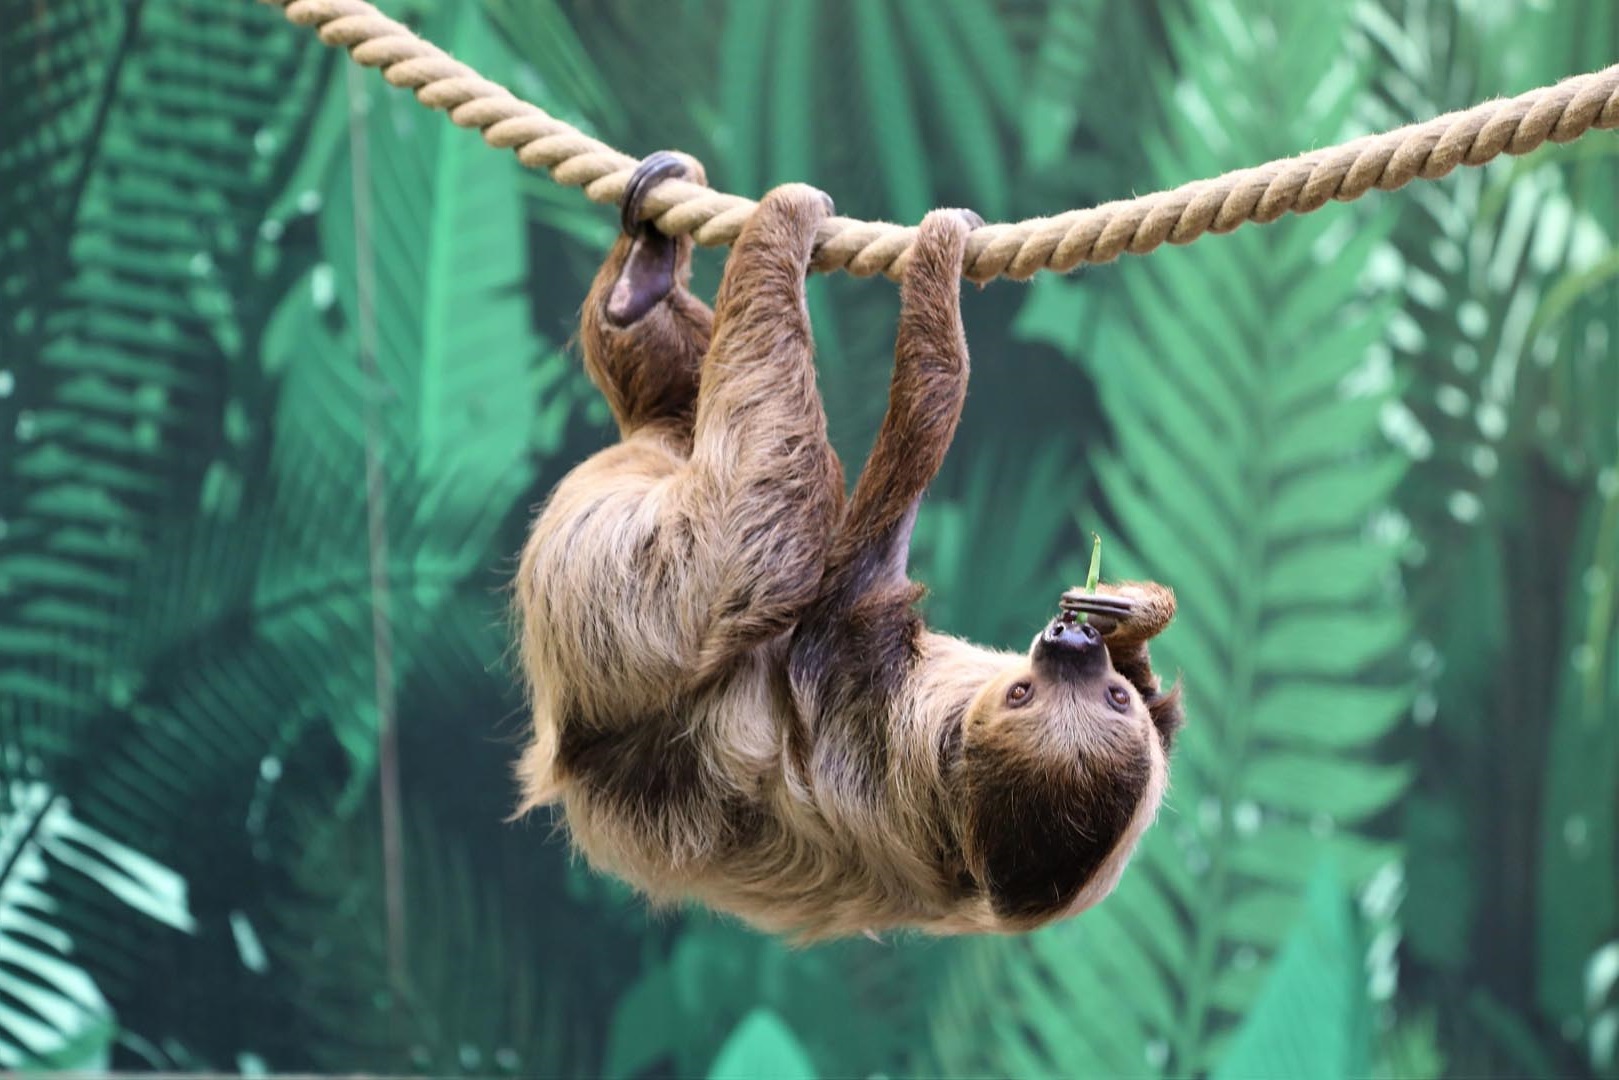 Linne's two-toed sloth Nico hanging upside down from rope. IMAGE: Rhiordan Langan-Fortune 2023